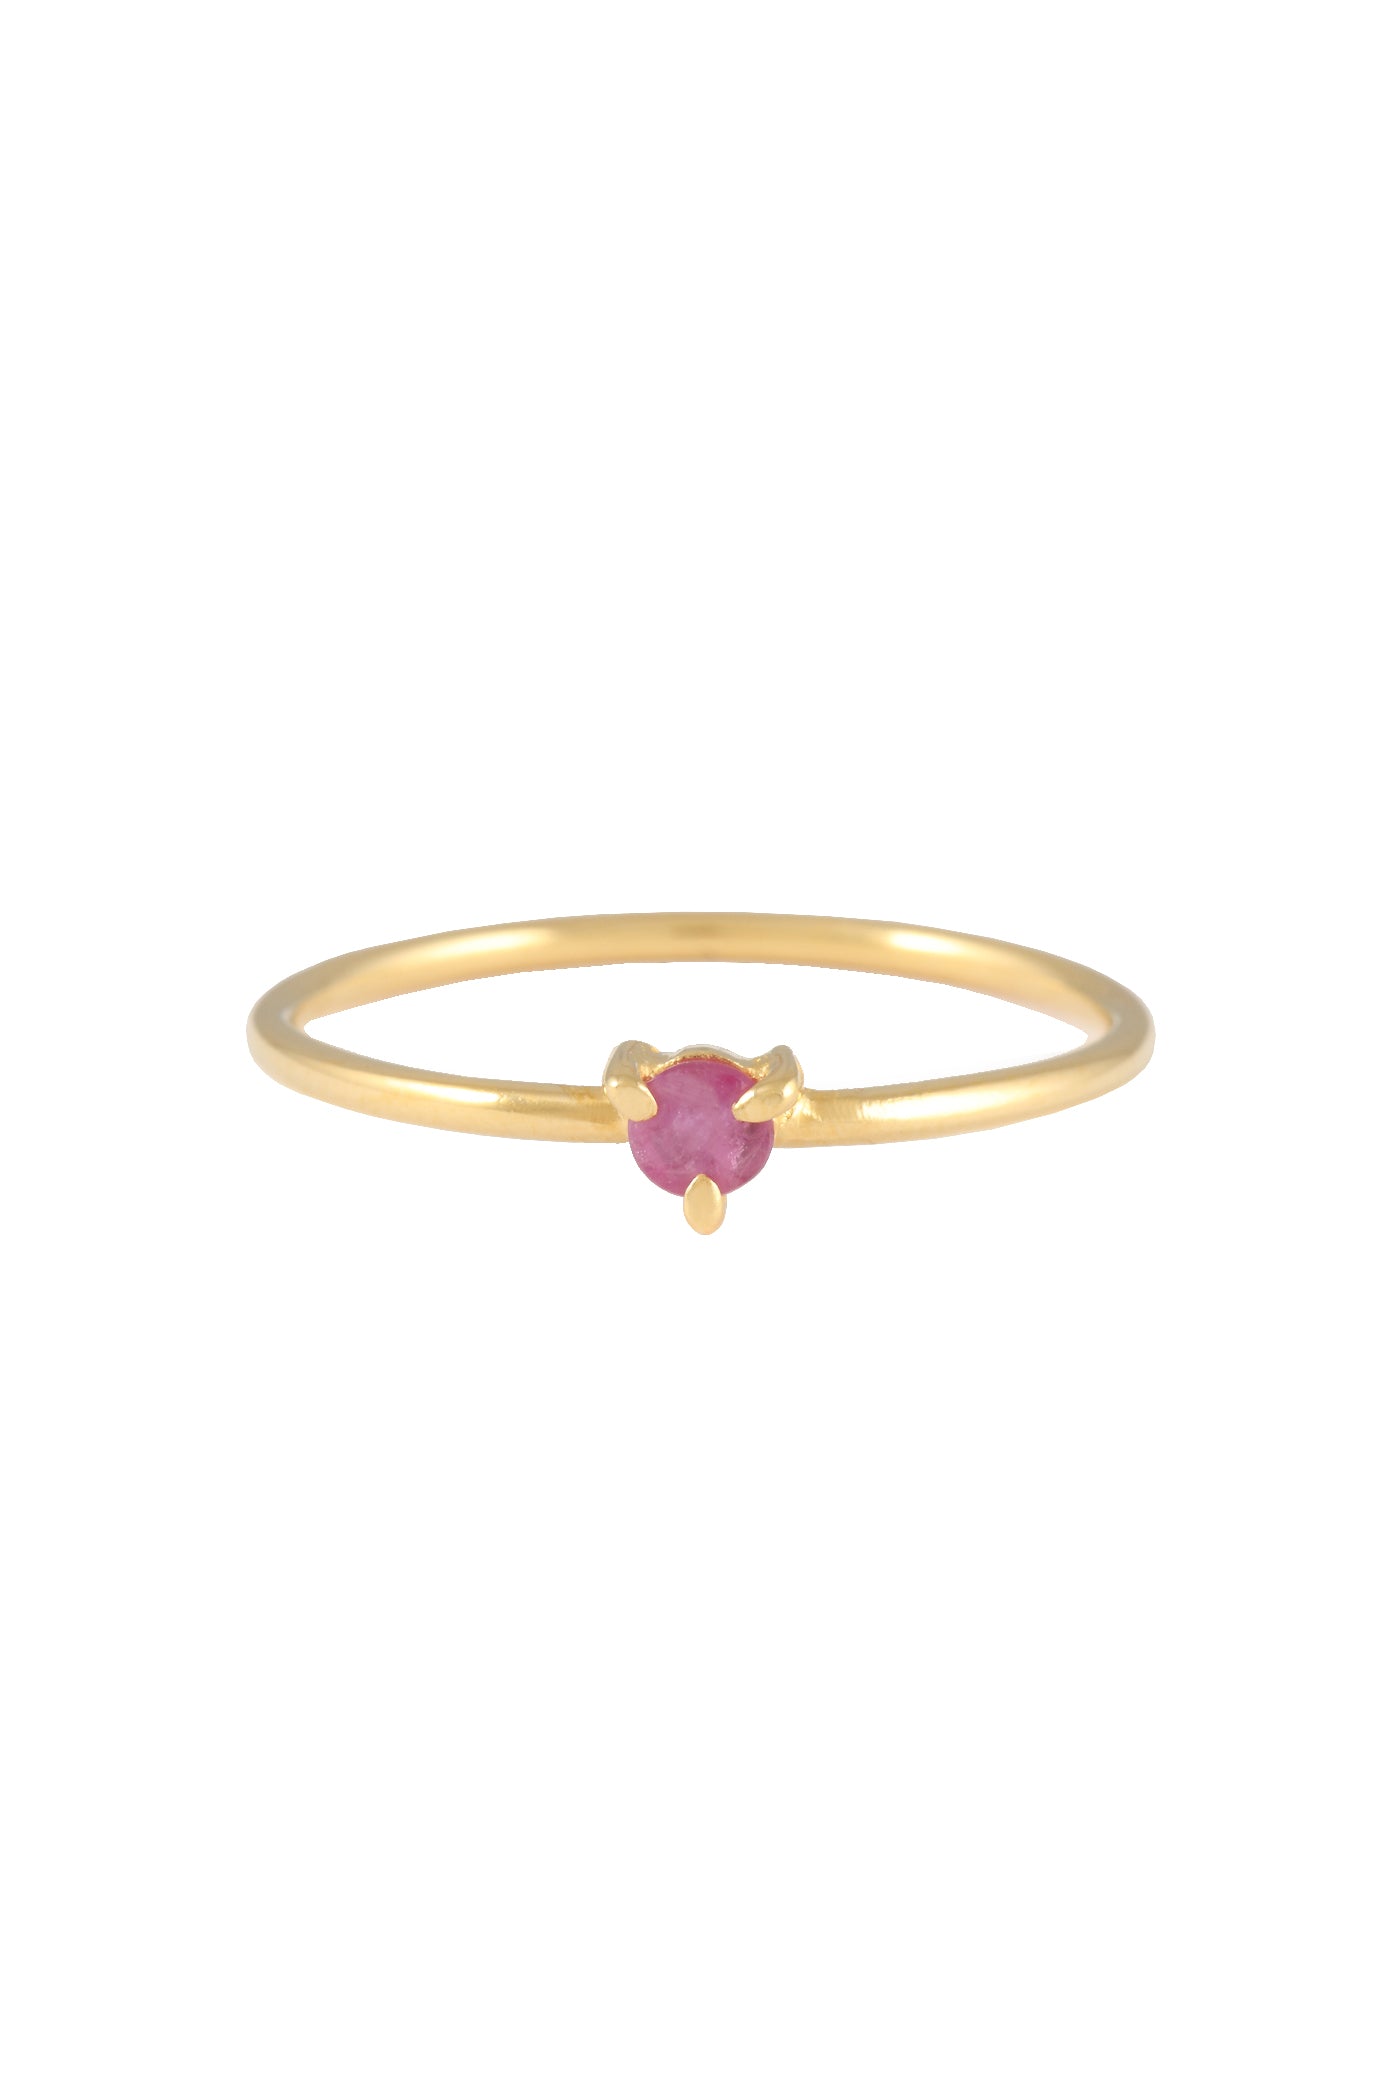 Solid Gold Thin ring with 3 mm stone